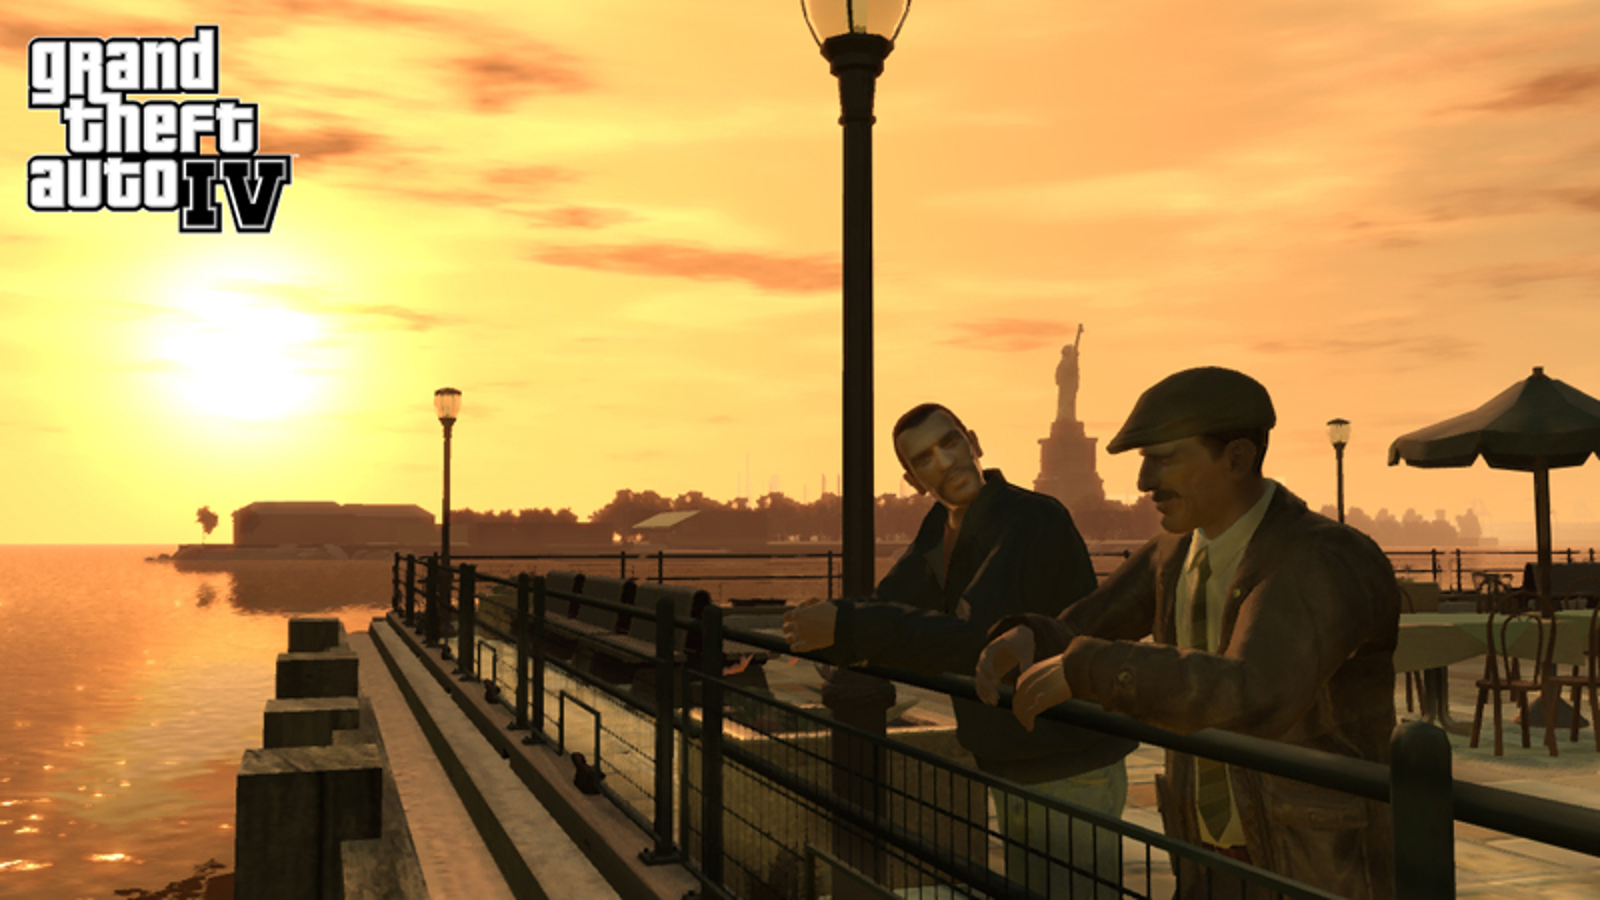 GTA 4 cheats, All codes for Xbox, PS3, PS4, PS5 and PC